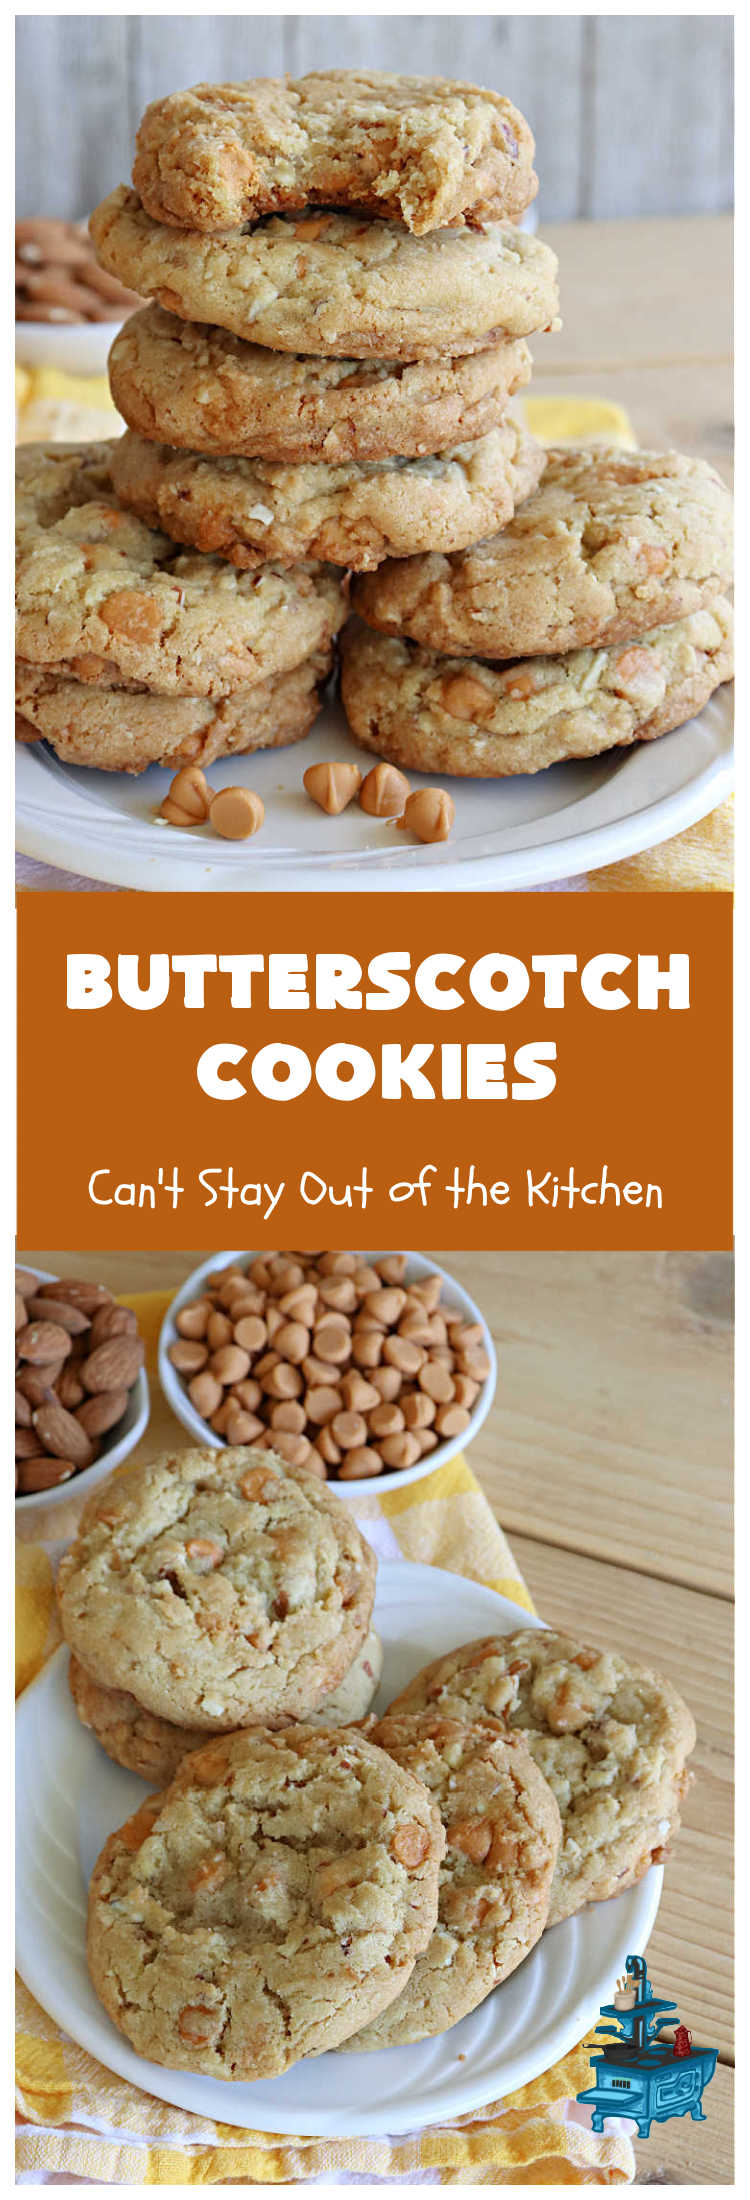 Butterscotch Cookies | Can't Stay Out of the Kitchen | these rich, decadent and heavenly #cookies are filled with #ButterscotchChips & #almonds. The combination of flavors is amazing. Excellent for soccer or hockey practices, potlucks, #tailgating parties or #holiday #baking. #dessert #ButterscotchDessert #AlmondDessert #ChristmasCookieExchange #ButterscotchCookies